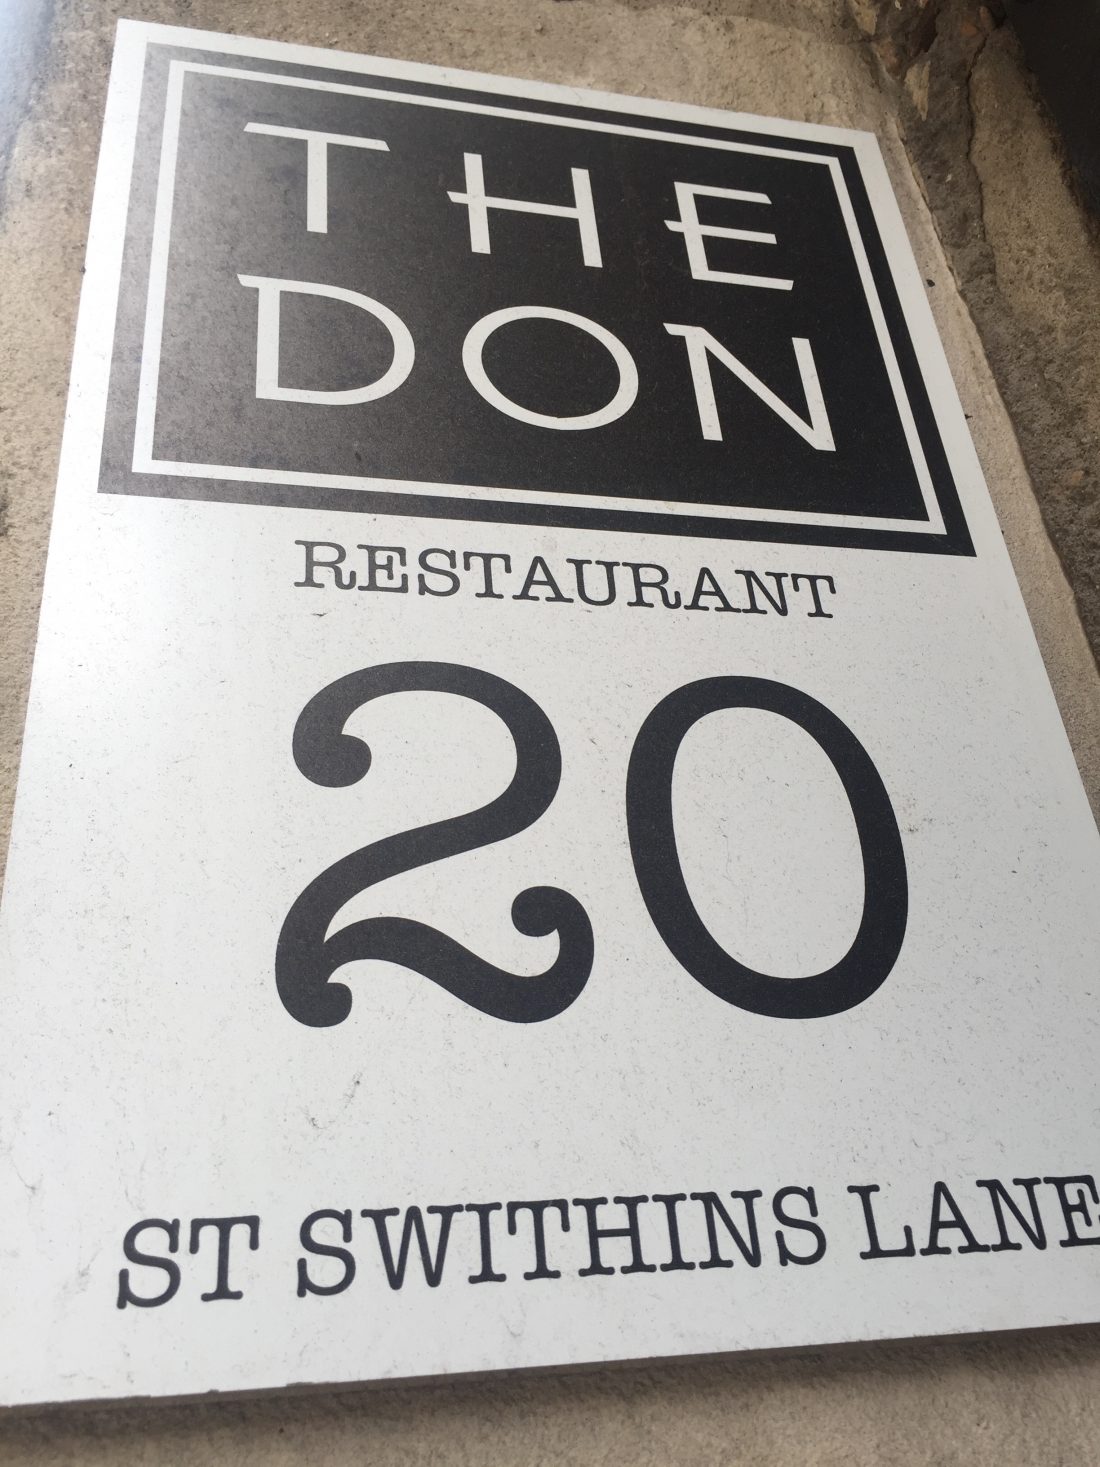 Dining in the city: The Don Restaurant